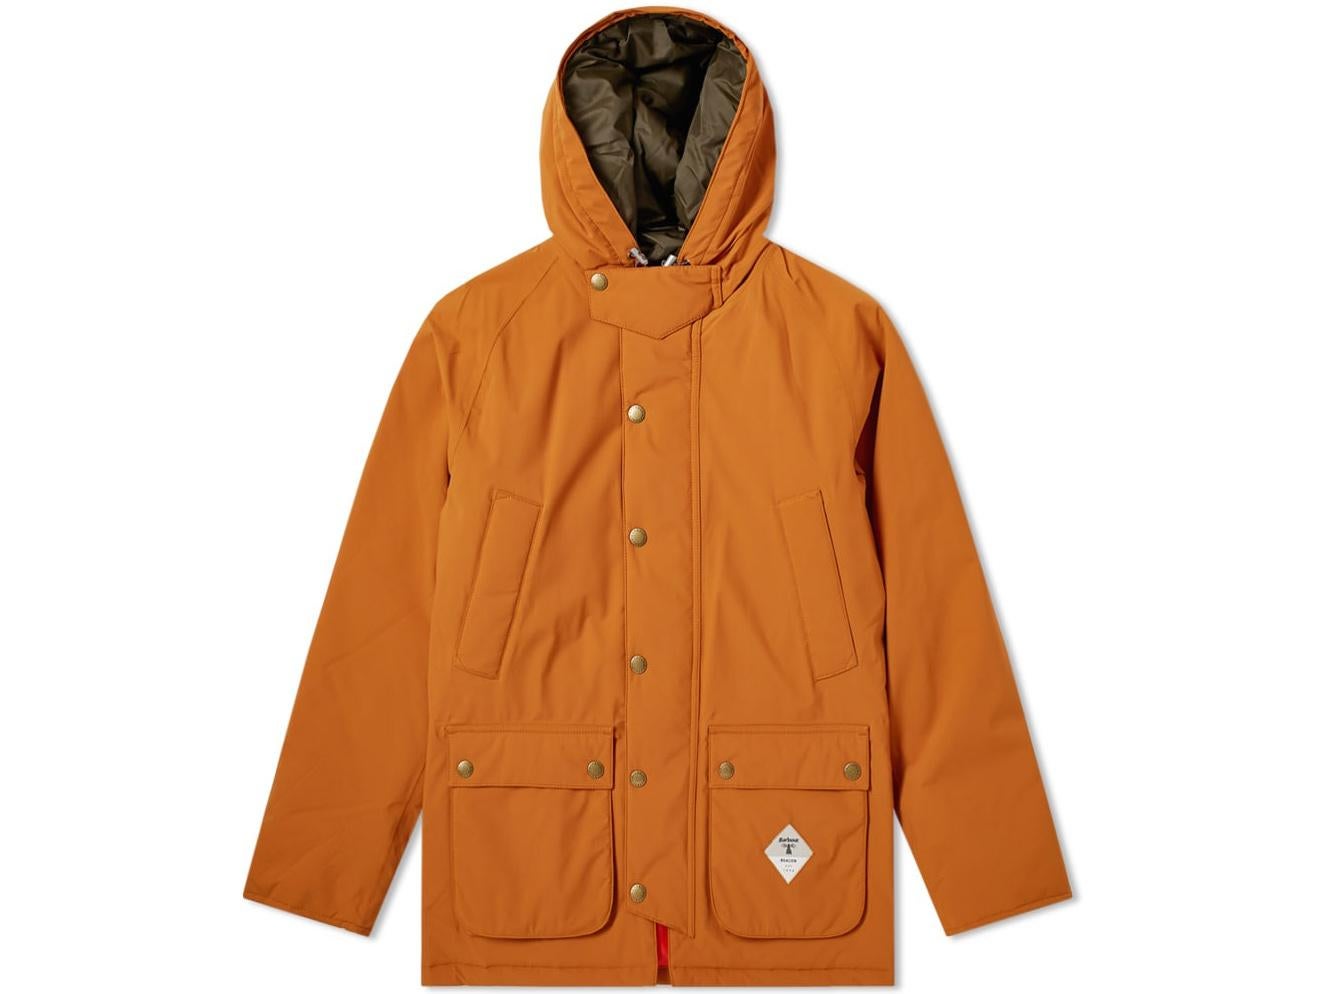 Barbour Fell Jacket, £199, End Clothing